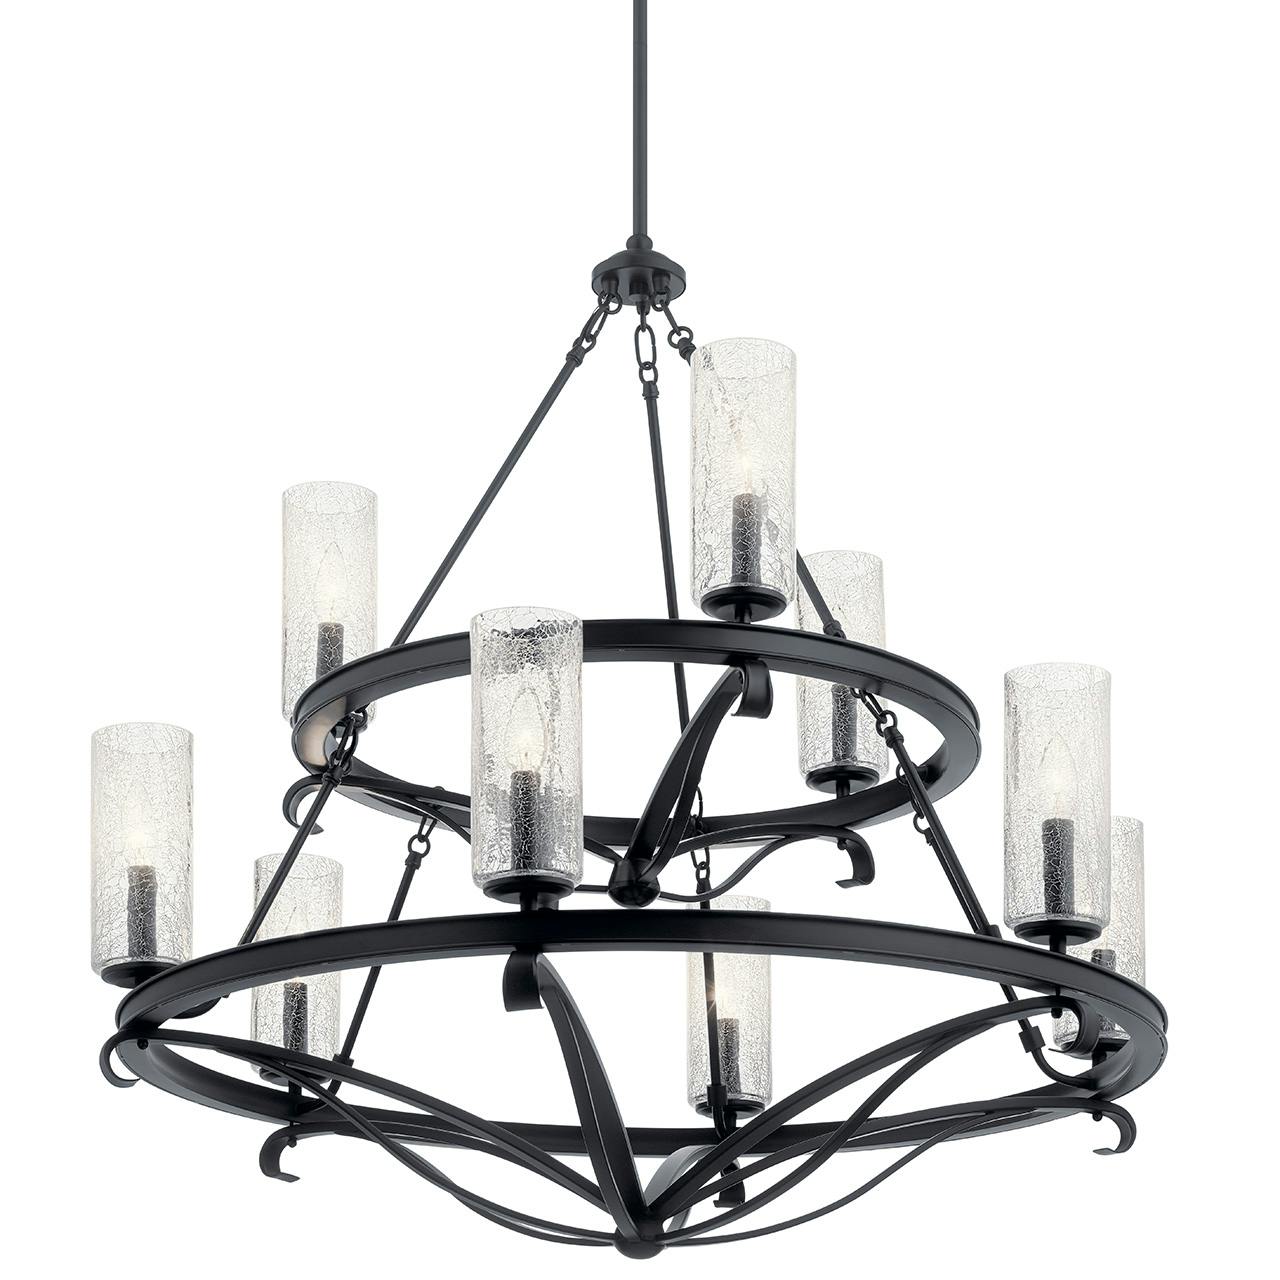 Krysia™ 9 Light Chandelier Black without the canopy on a white background